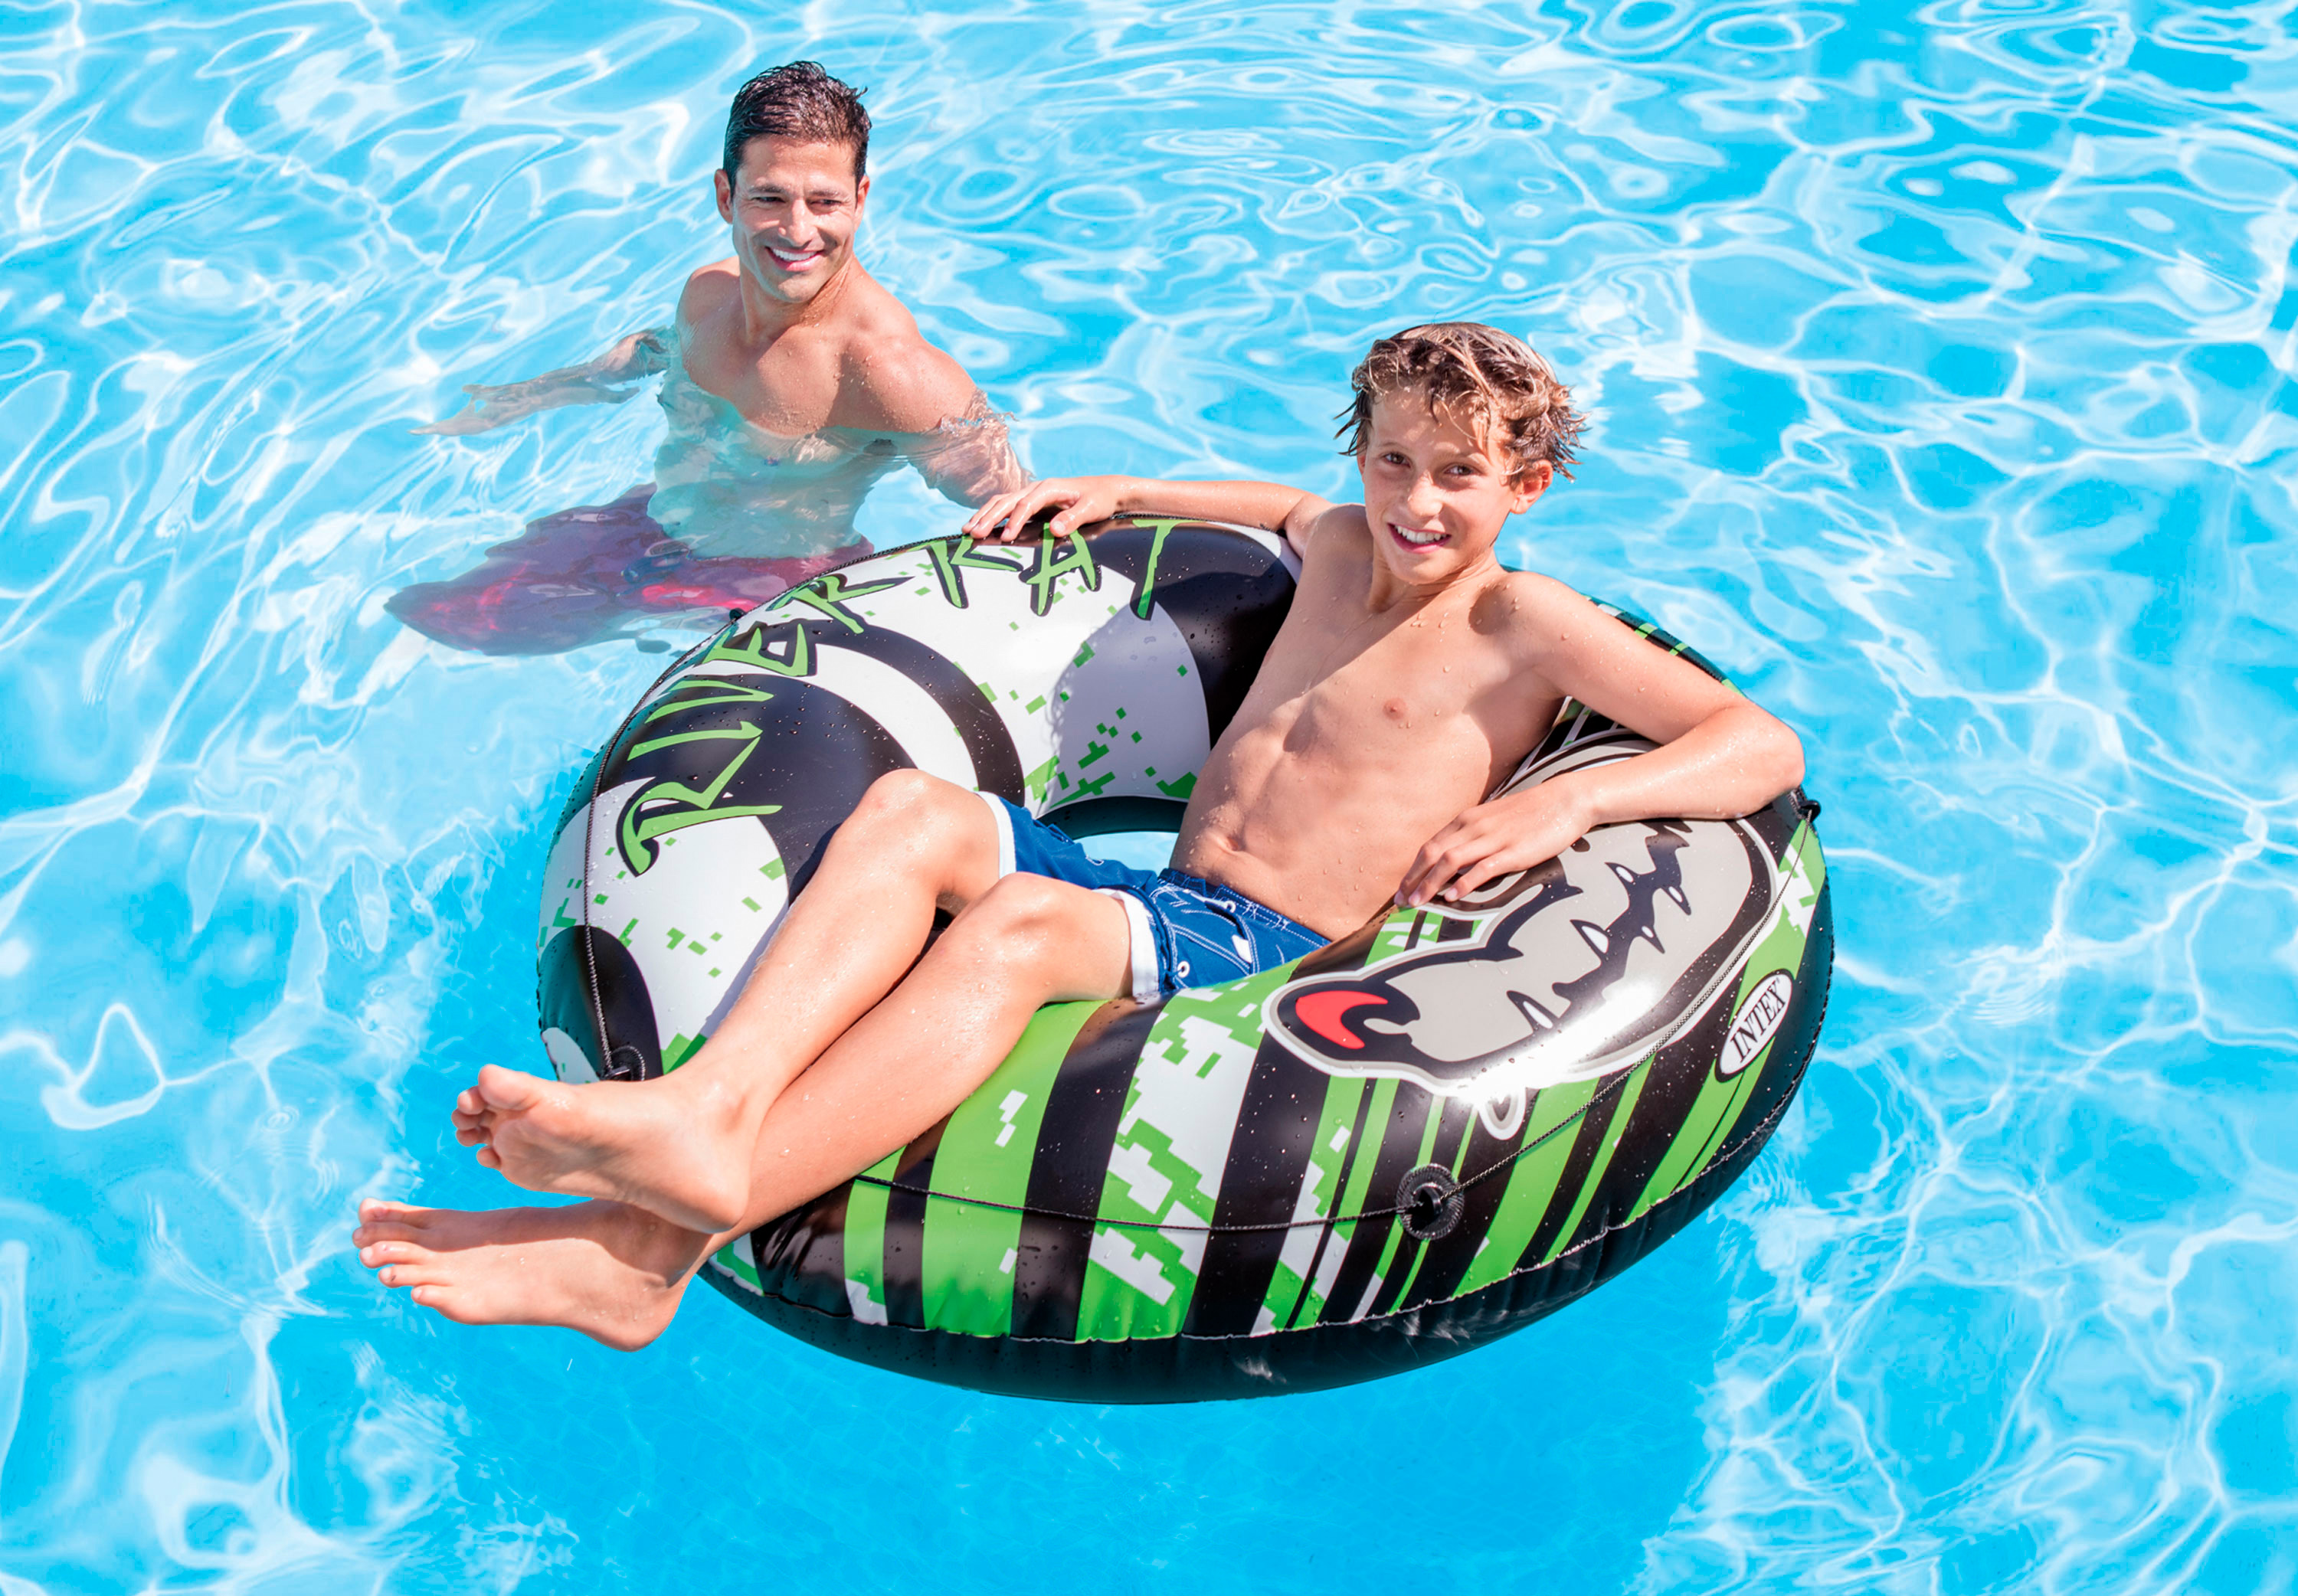 Intex River Rat 48-Inch Inflatable Tube Raft For Lake, Pool, or River - Colors may vary - image 5 of 13